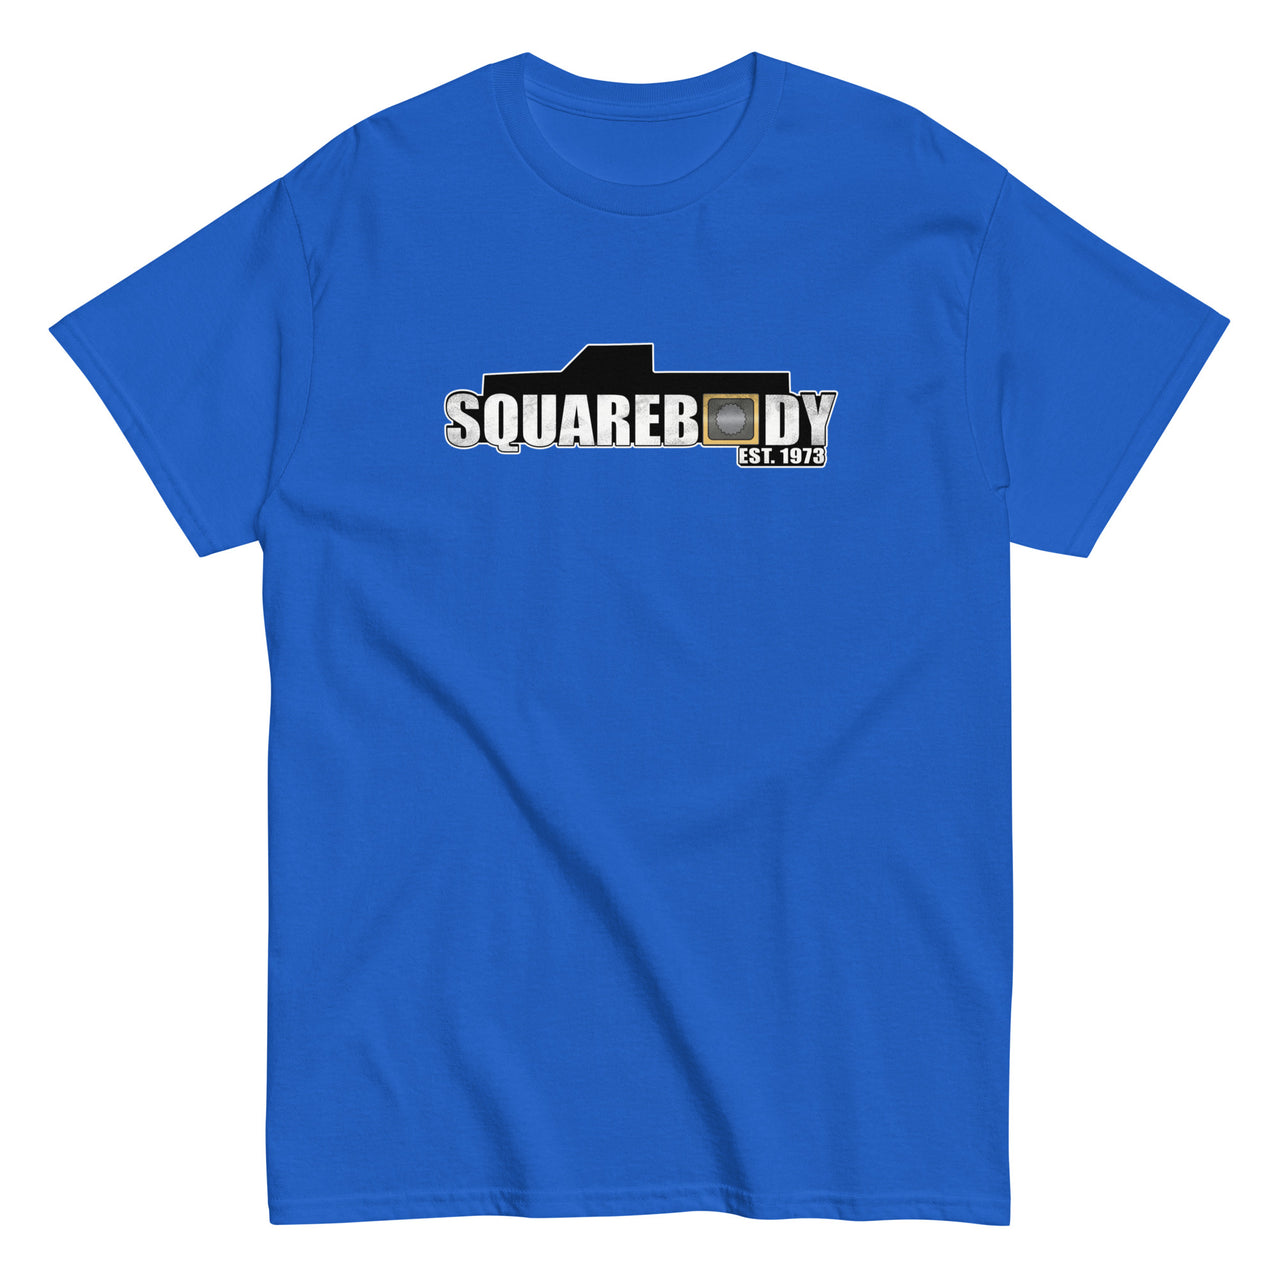 Square Body Est 1973 T-Shirt in blue